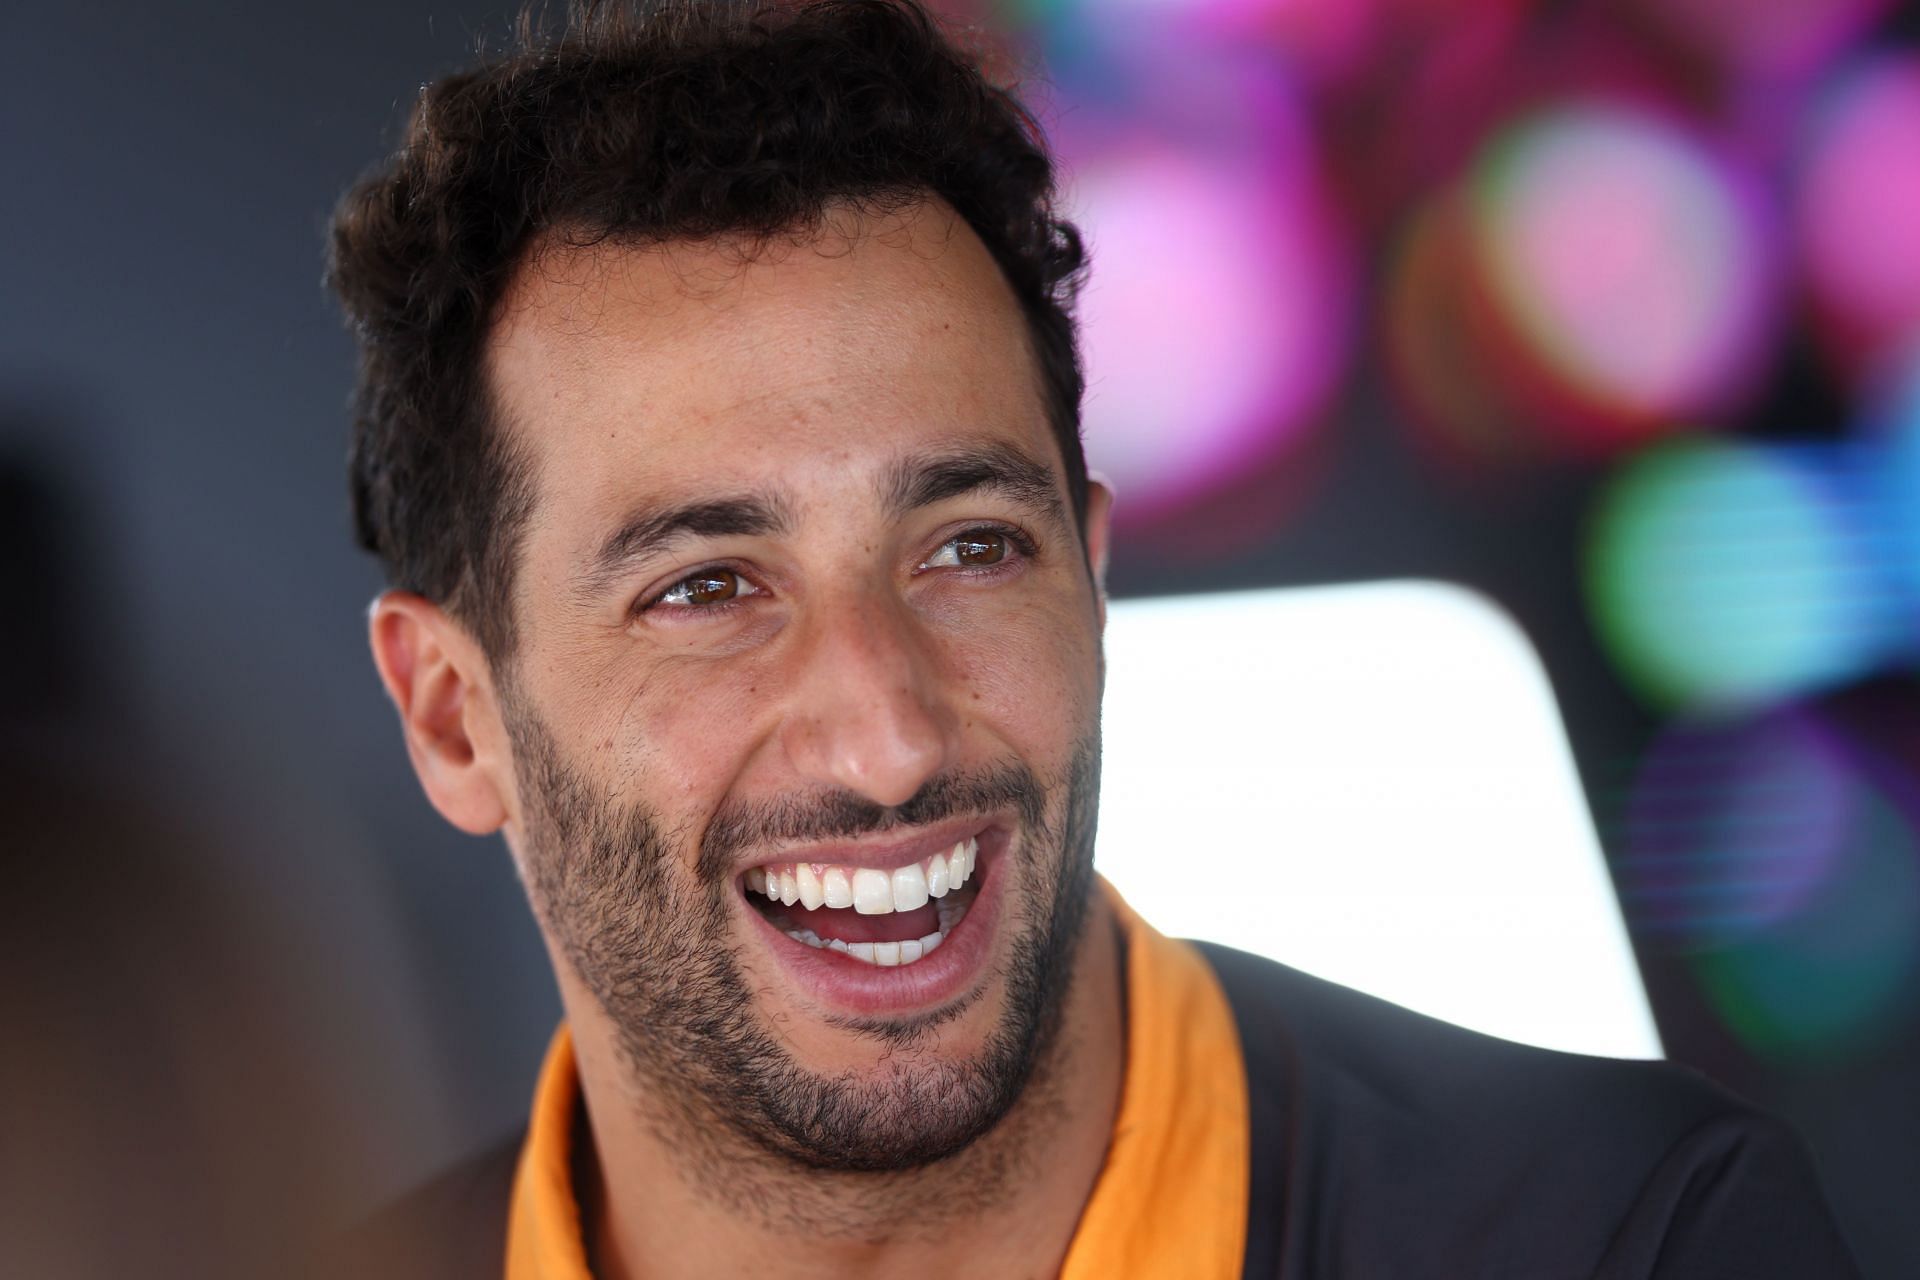 Daniel Ricciardo reserves the right to quit McLaren rather than the team forcing him out